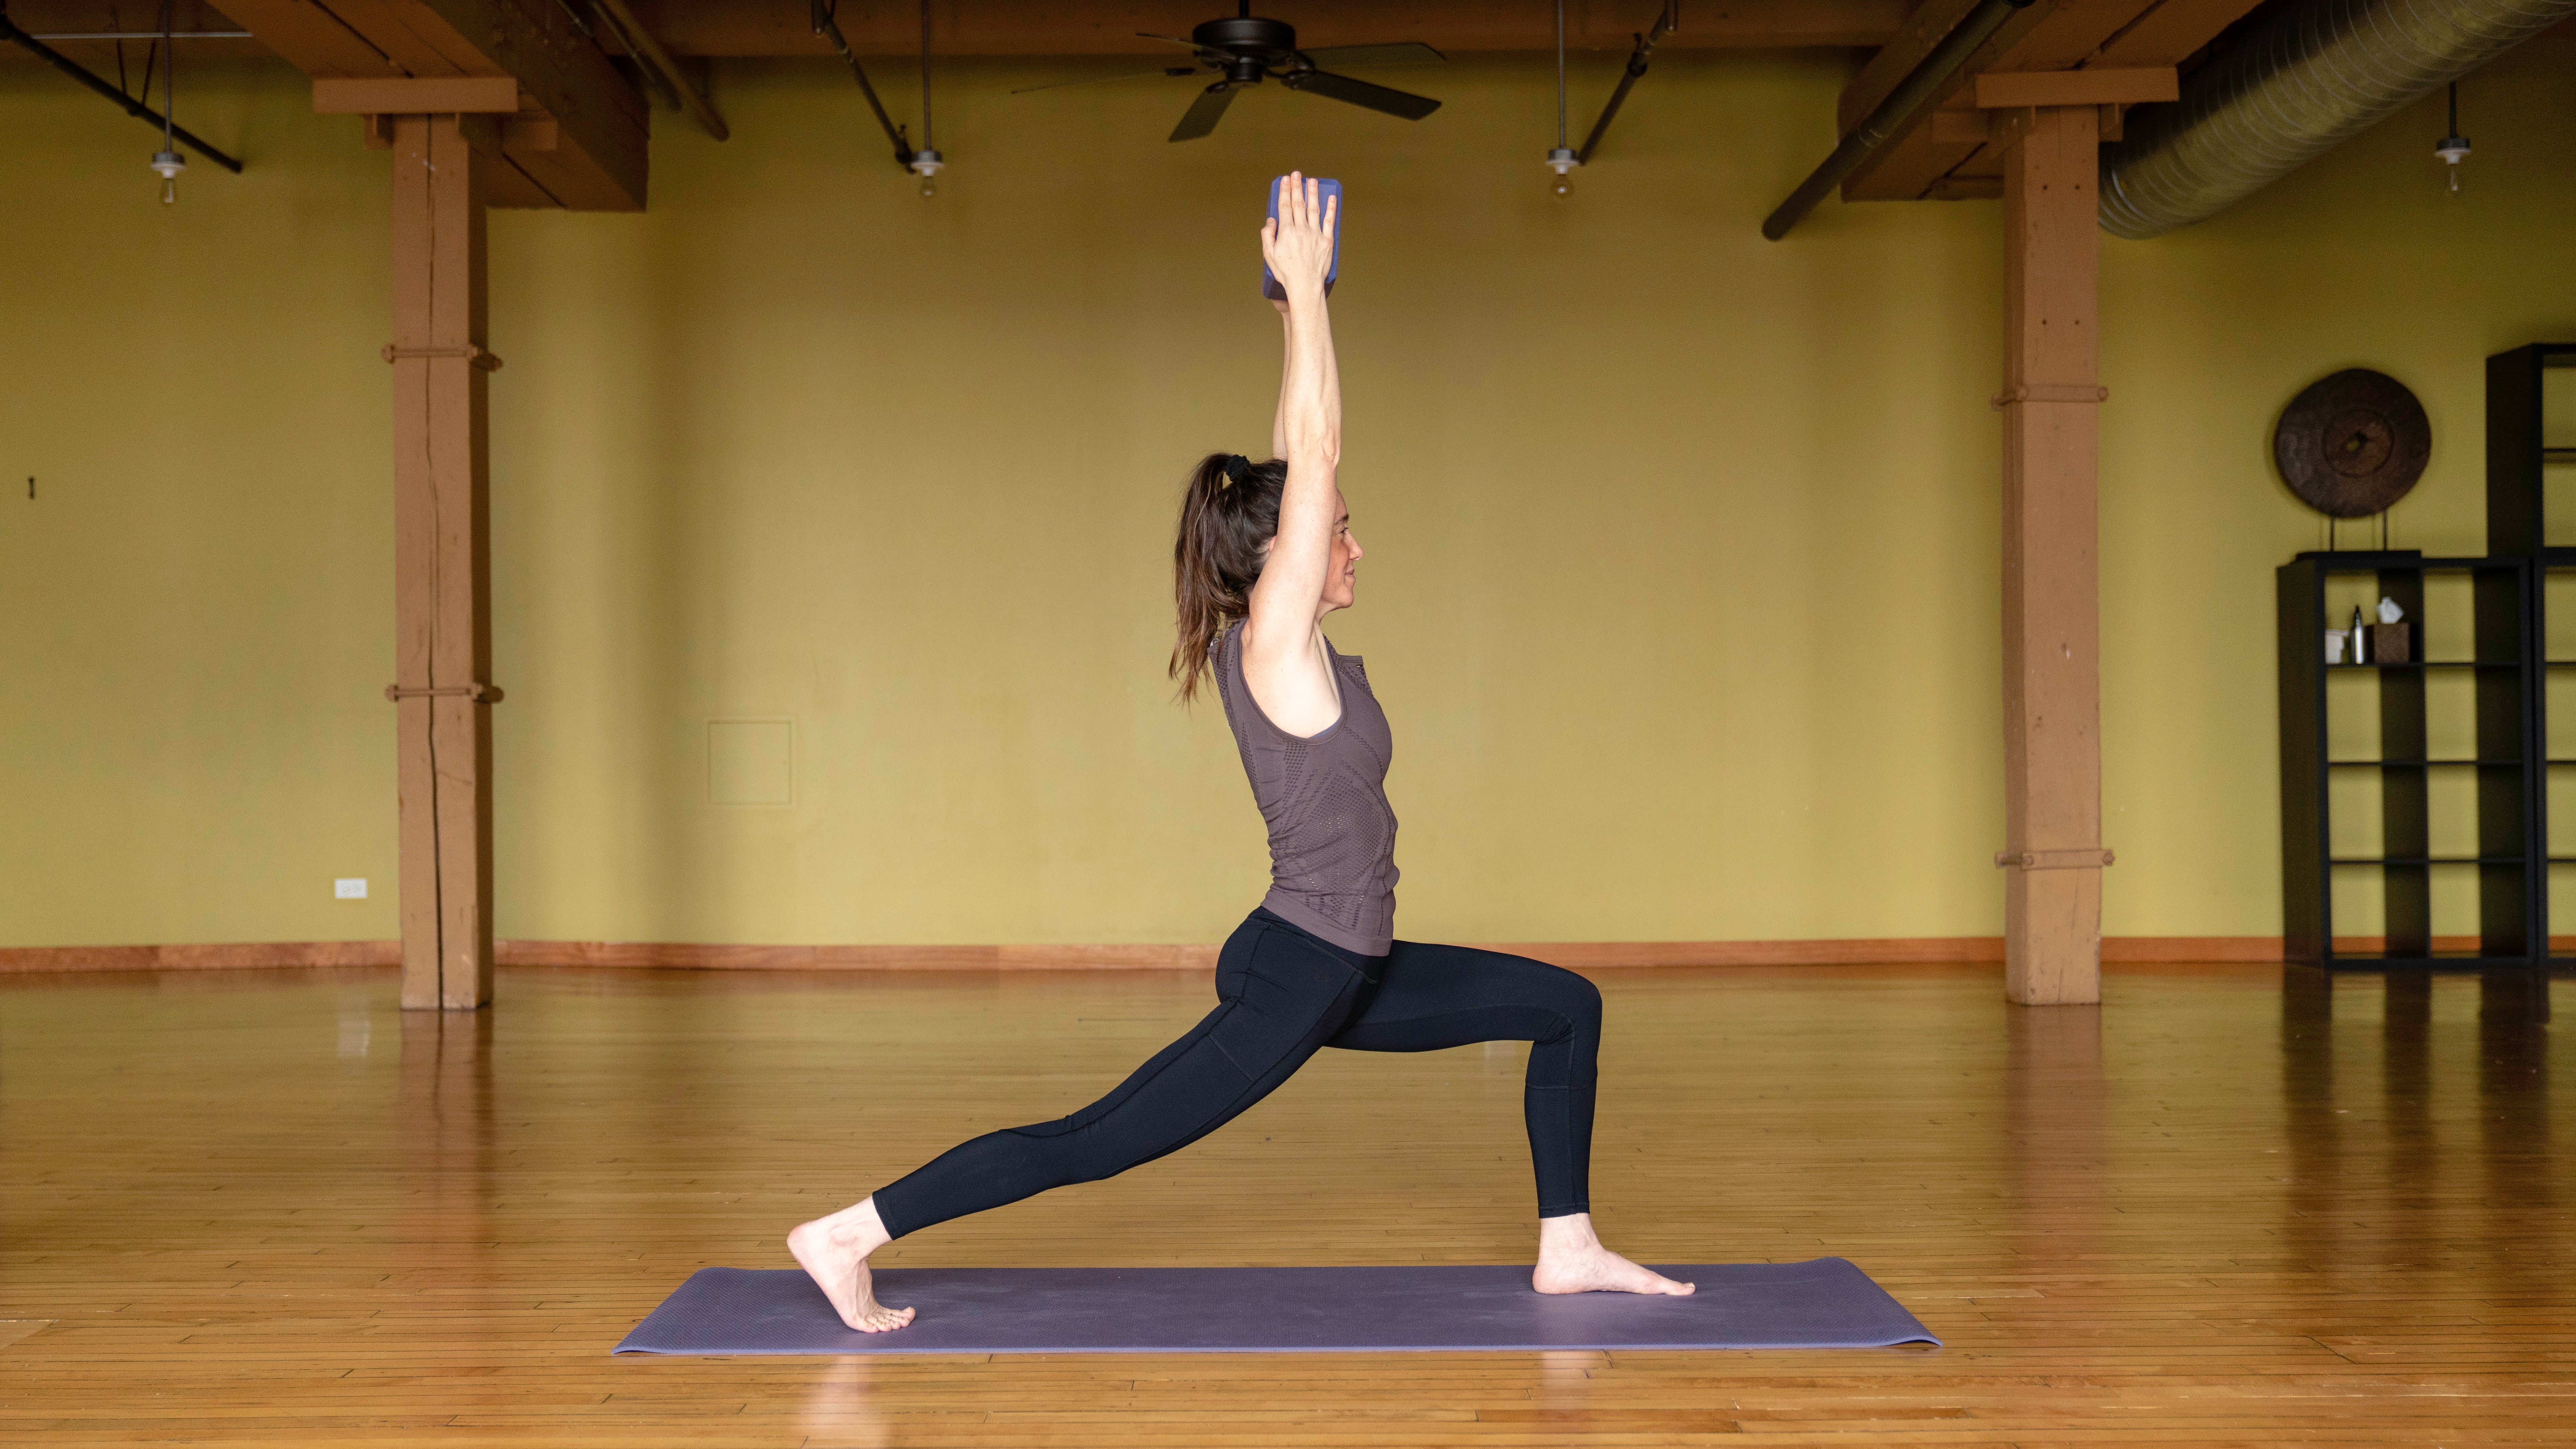 9 Yoga Stretches to Increase Flexibility And A Super Toned Body -  GymGuider.com | Yoga for flexibility, Yoga stretches, Stretches to increase  flexibility